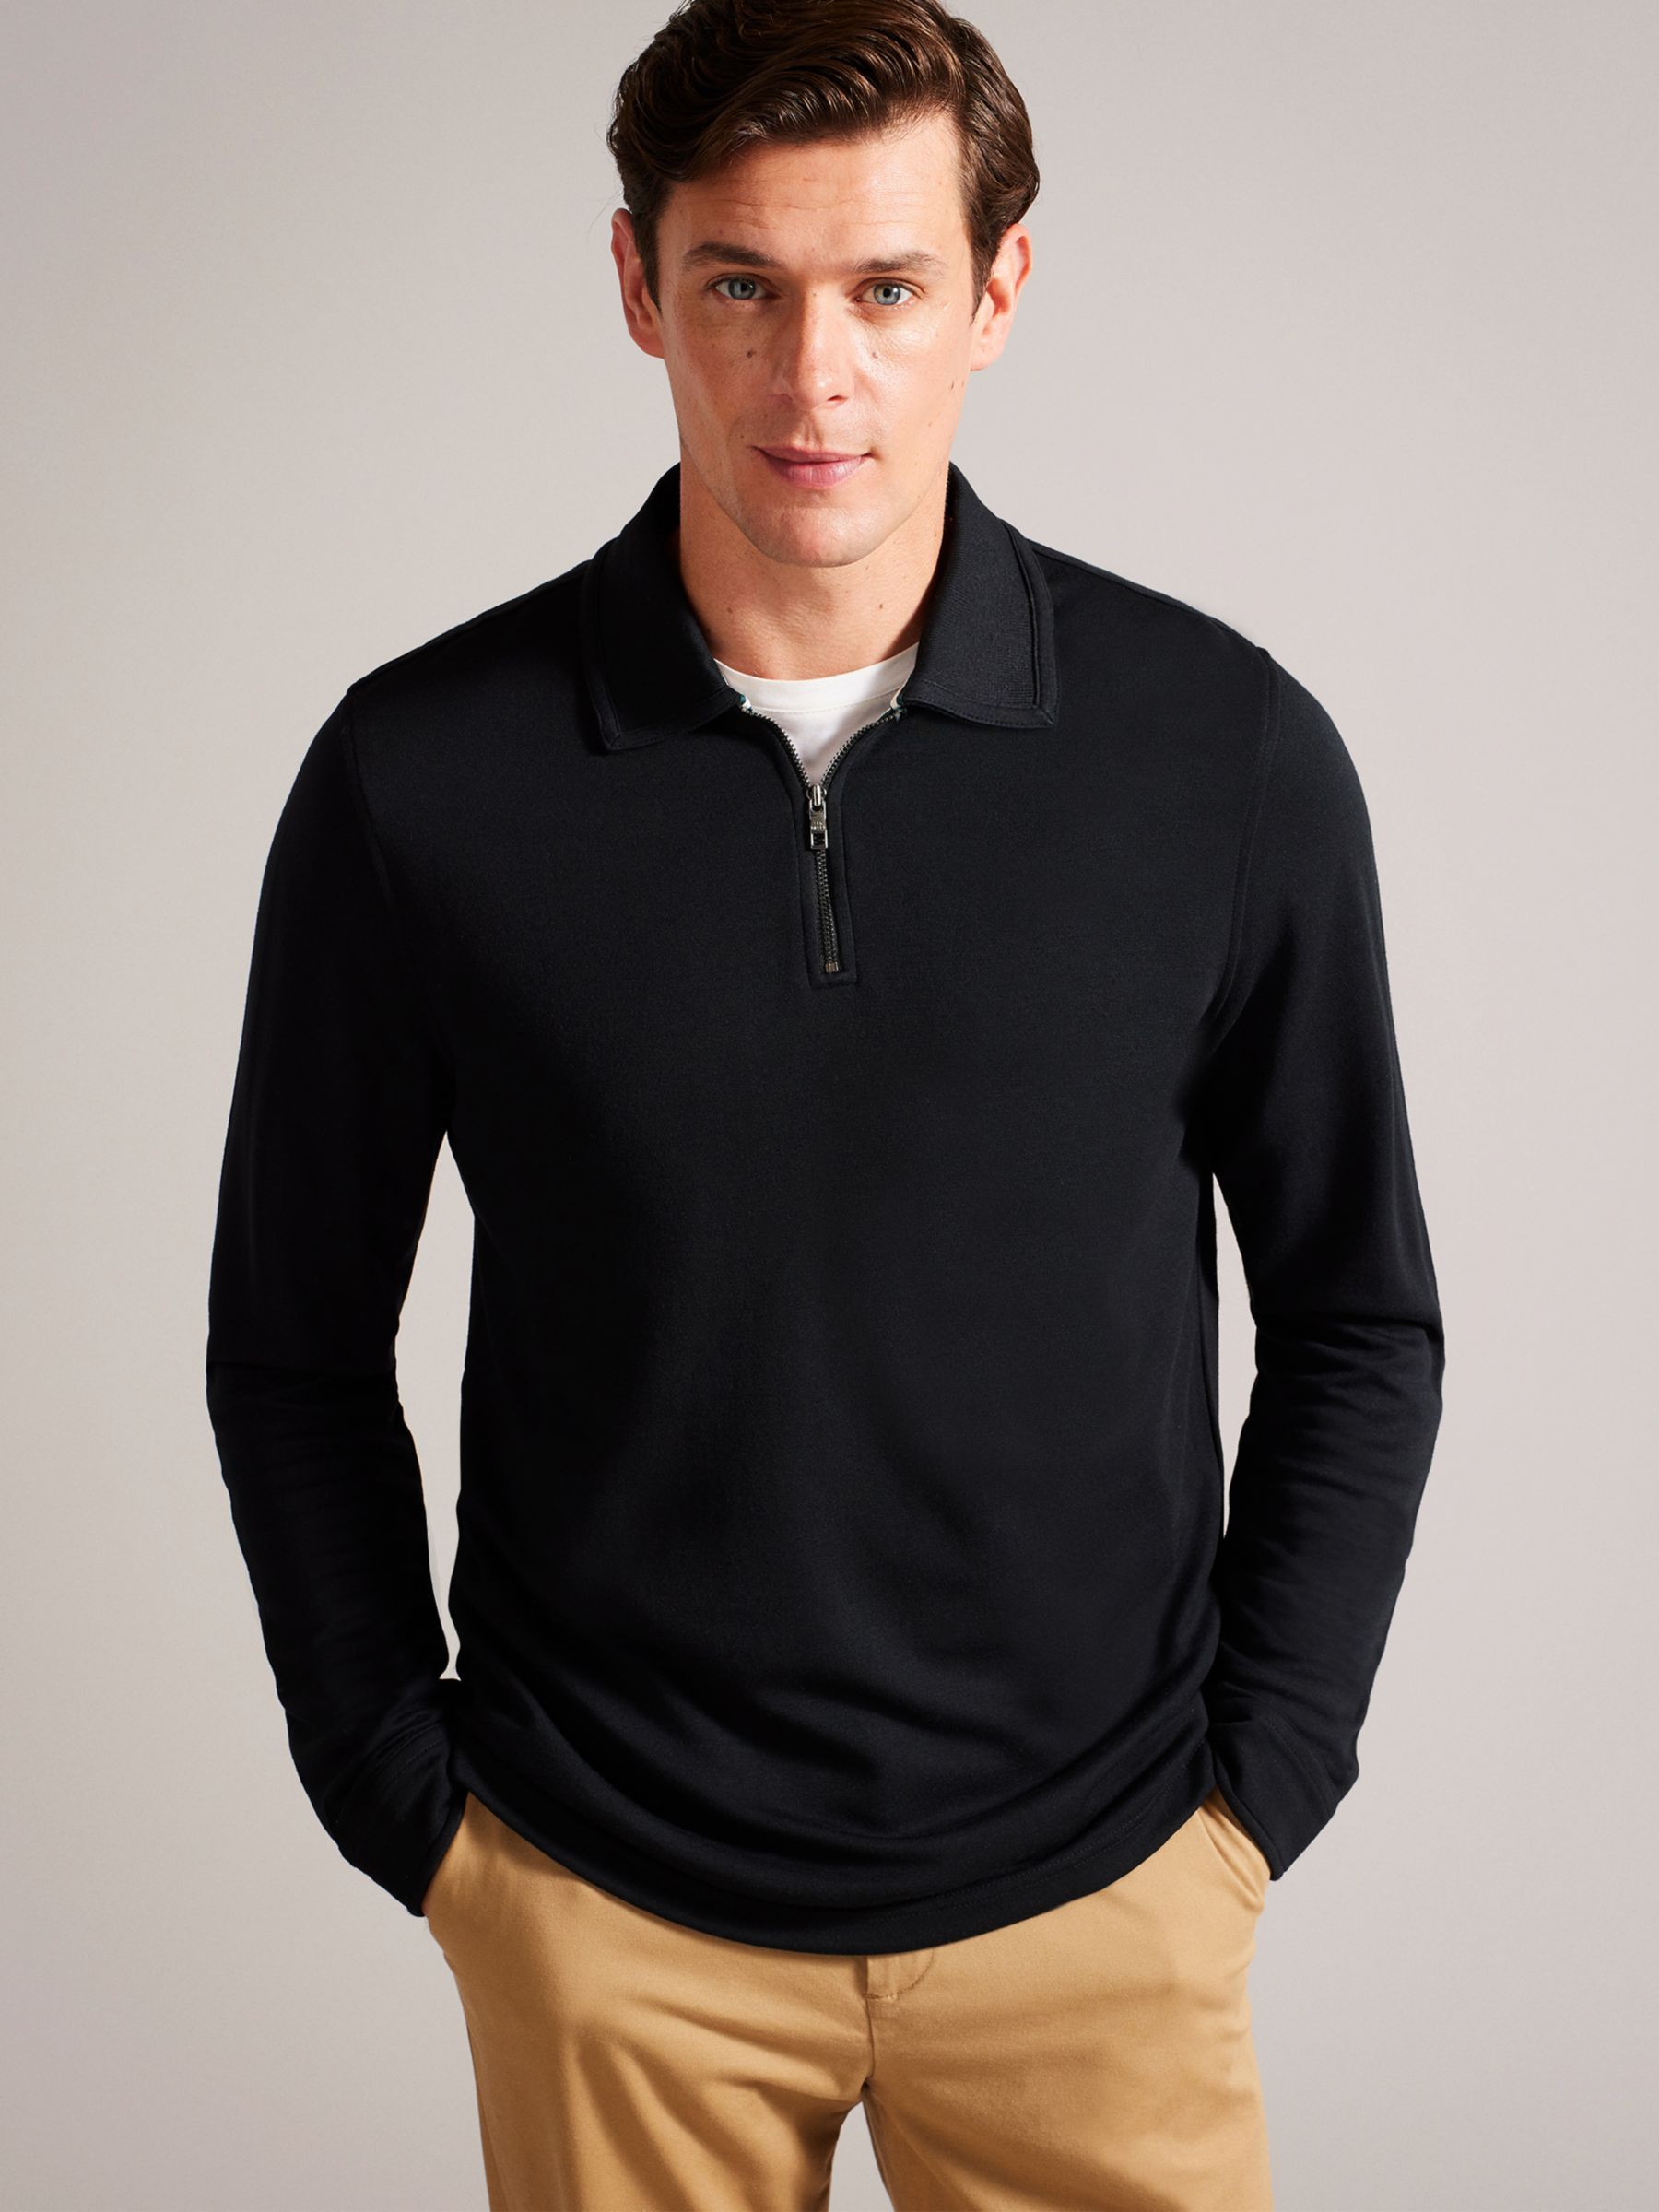 Ted Baker Karpol Long Sleeve Soft Touch Polo Top, Black, S